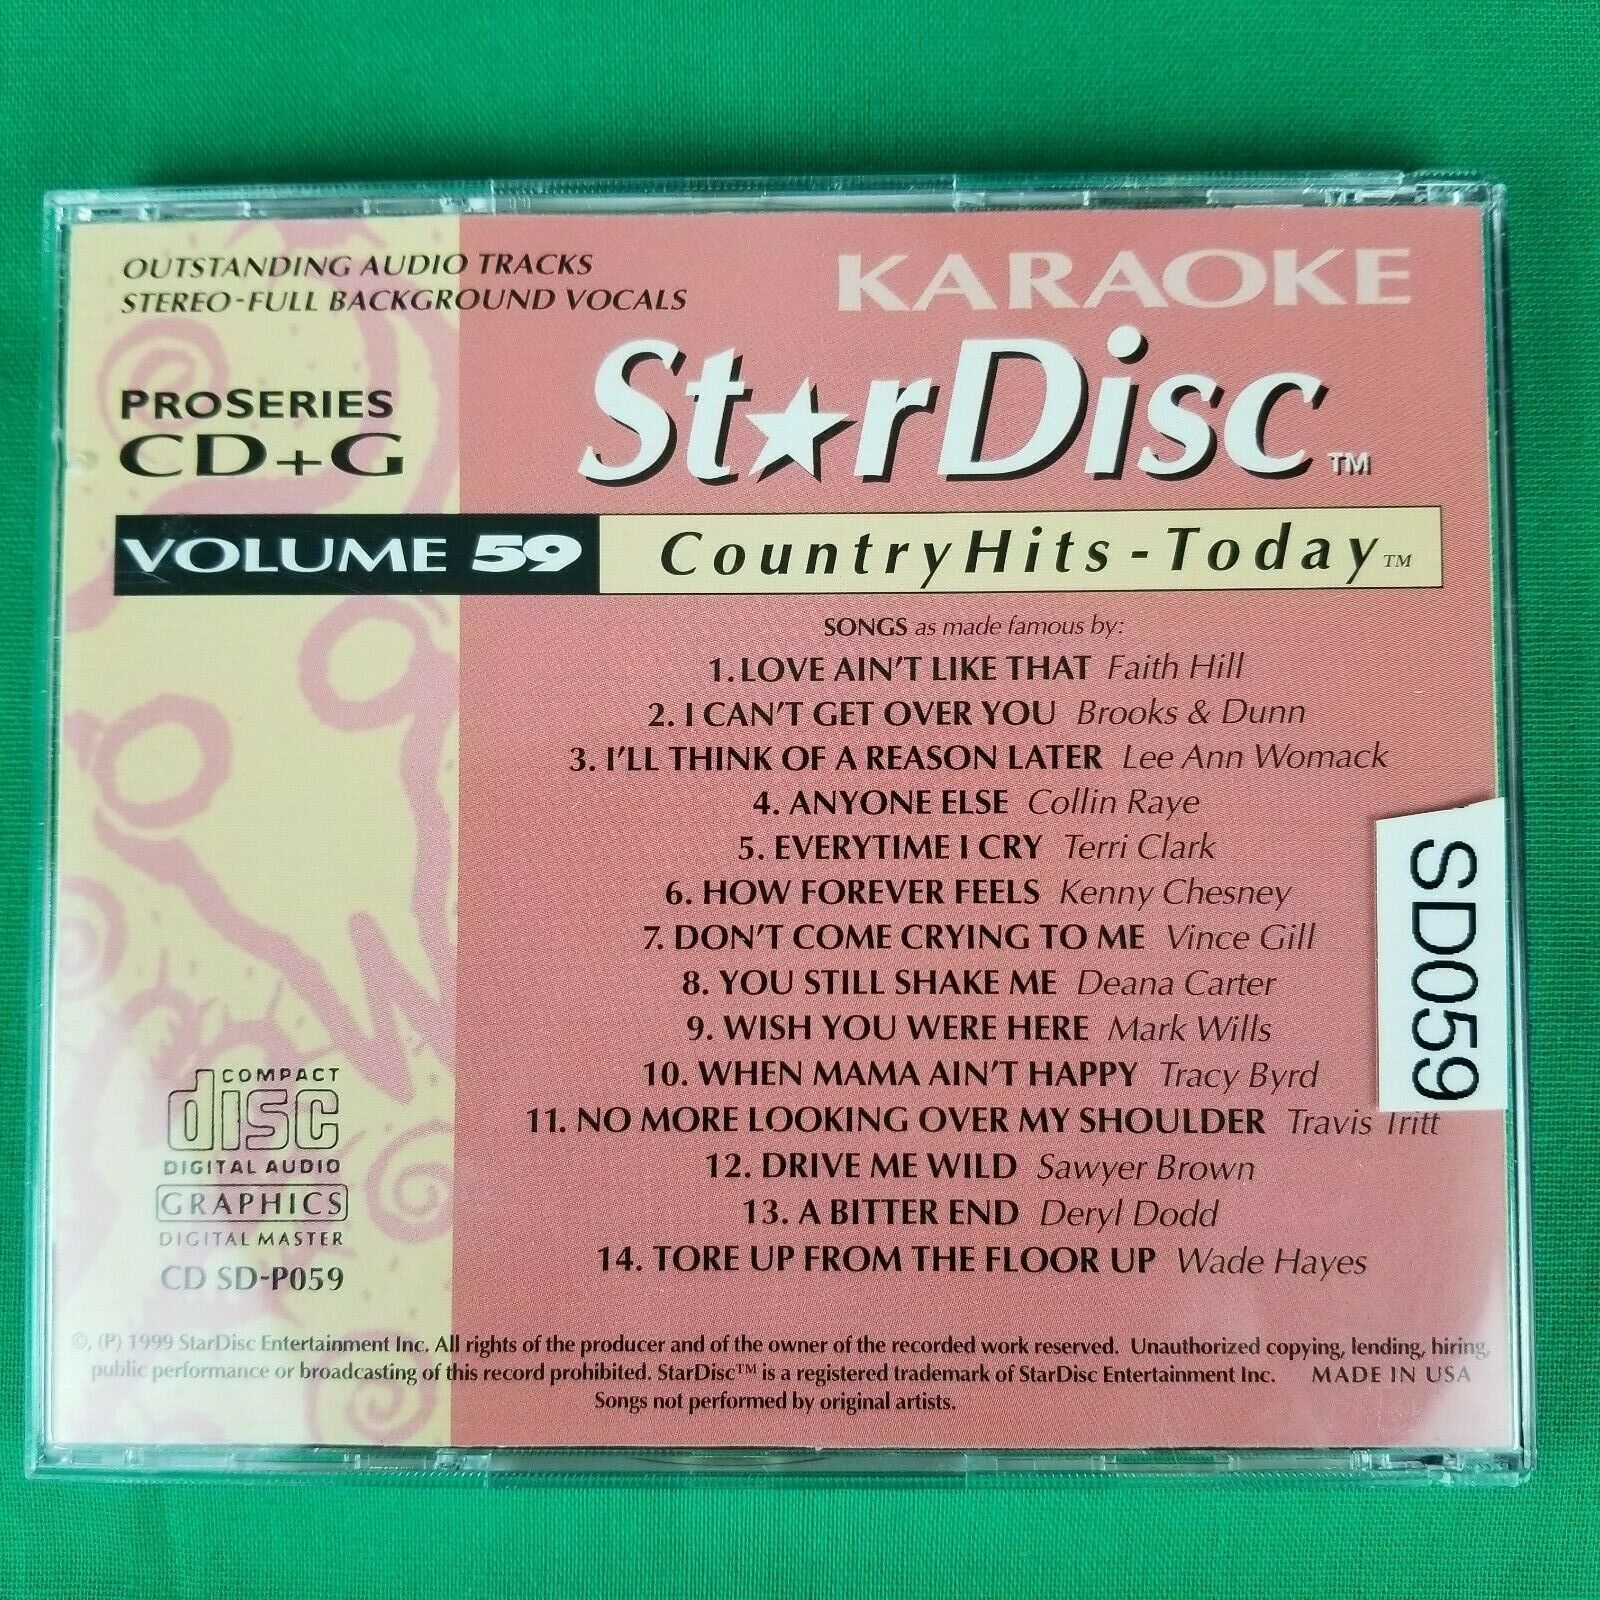 Pre-Owned Lot of 2 StarDisc Karaoke Country Classics CD+G Volume 58 & 59 Star Disc - фотография #4